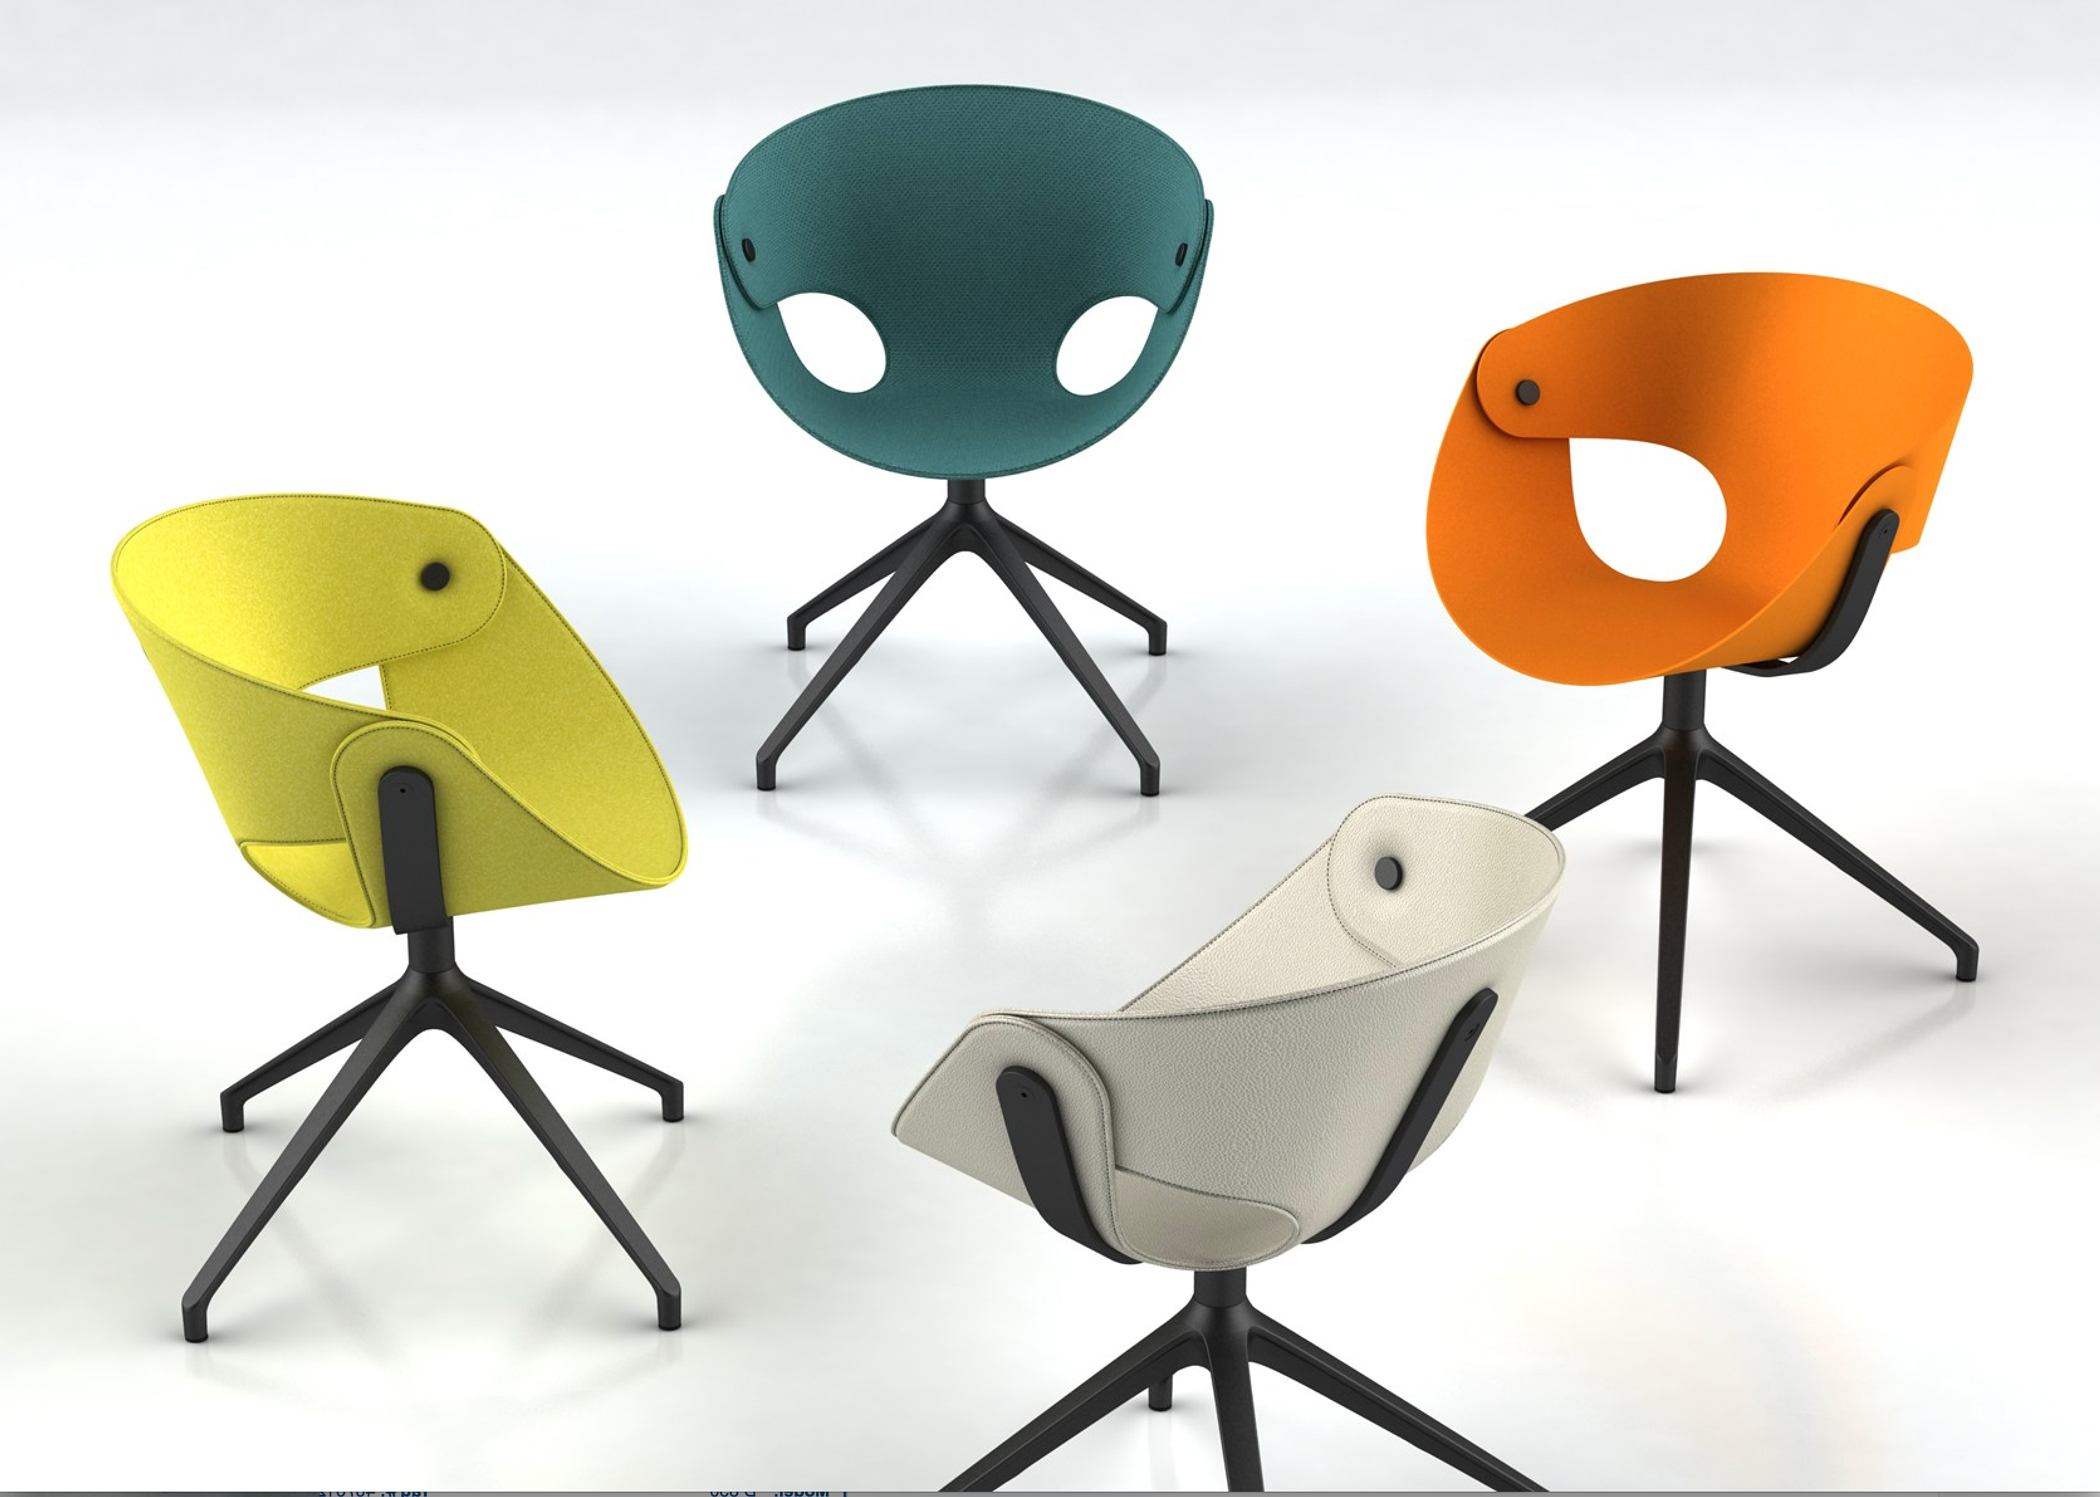 Colorul-Eyelet-Chairs